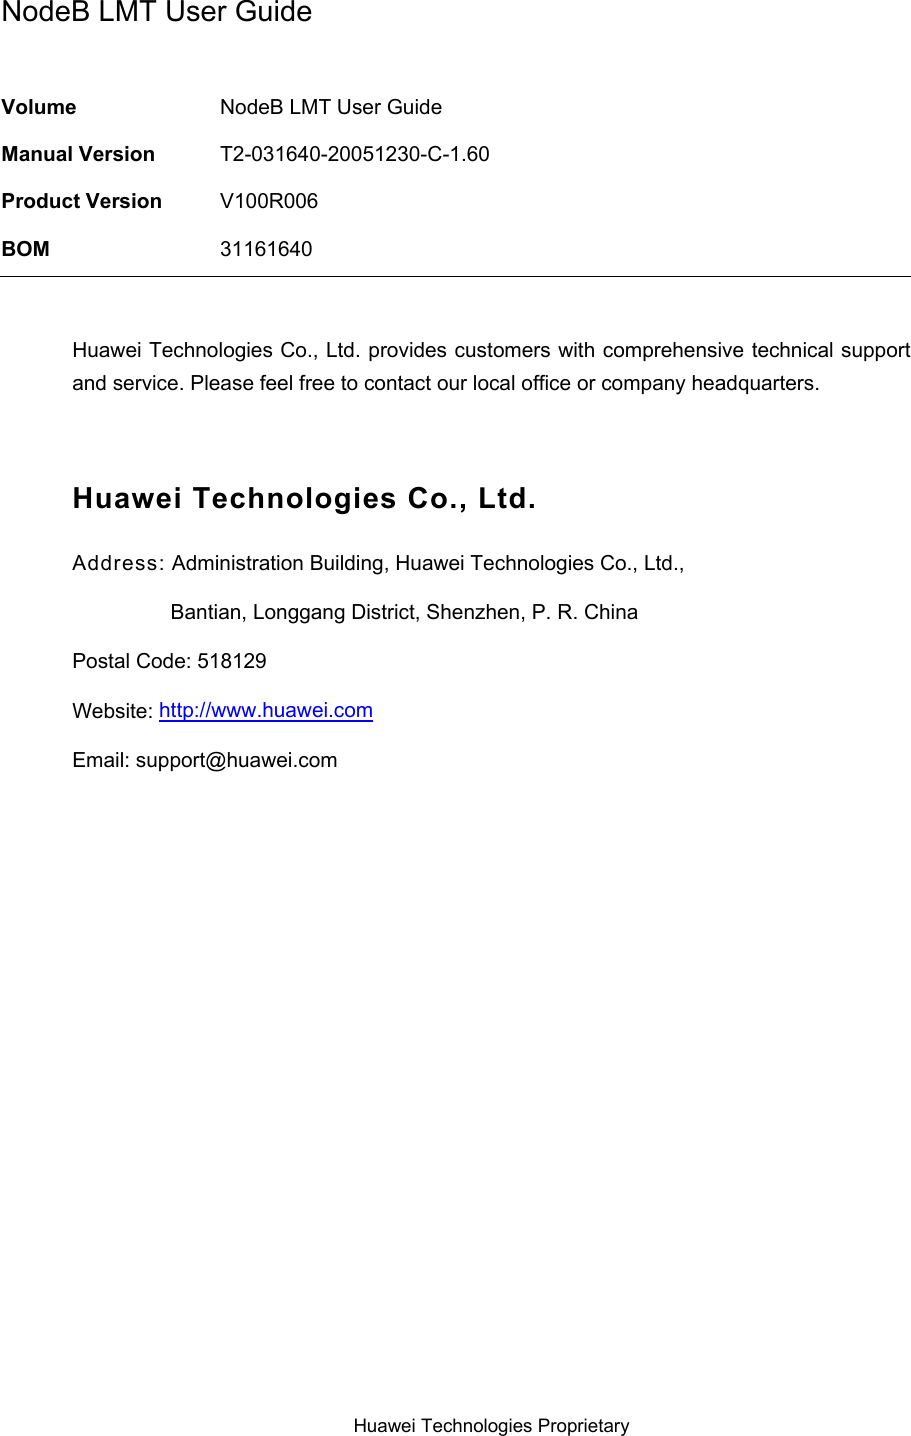  NodeB LMT User Guide  Volume  NodeB LMT User Guide Manual Version  T2-031640-20051230-C-1.60 Product Version  V100R006 BOM  31161640  Huawei Technologies Co., Ltd. provides customers with comprehensive technical support and service. Please feel free to contact our local office or company headquarters.  Huawei Technologies Co., Ltd. Address: Administration Building, Huawei Technologies Co., Ltd.,                  Bantian, Longgang District, Shenzhen, P. R. China Postal Code: 518129 Website: http://www.huawei.comEmail: support@huawei.com  Huawei Technologies Proprietary 